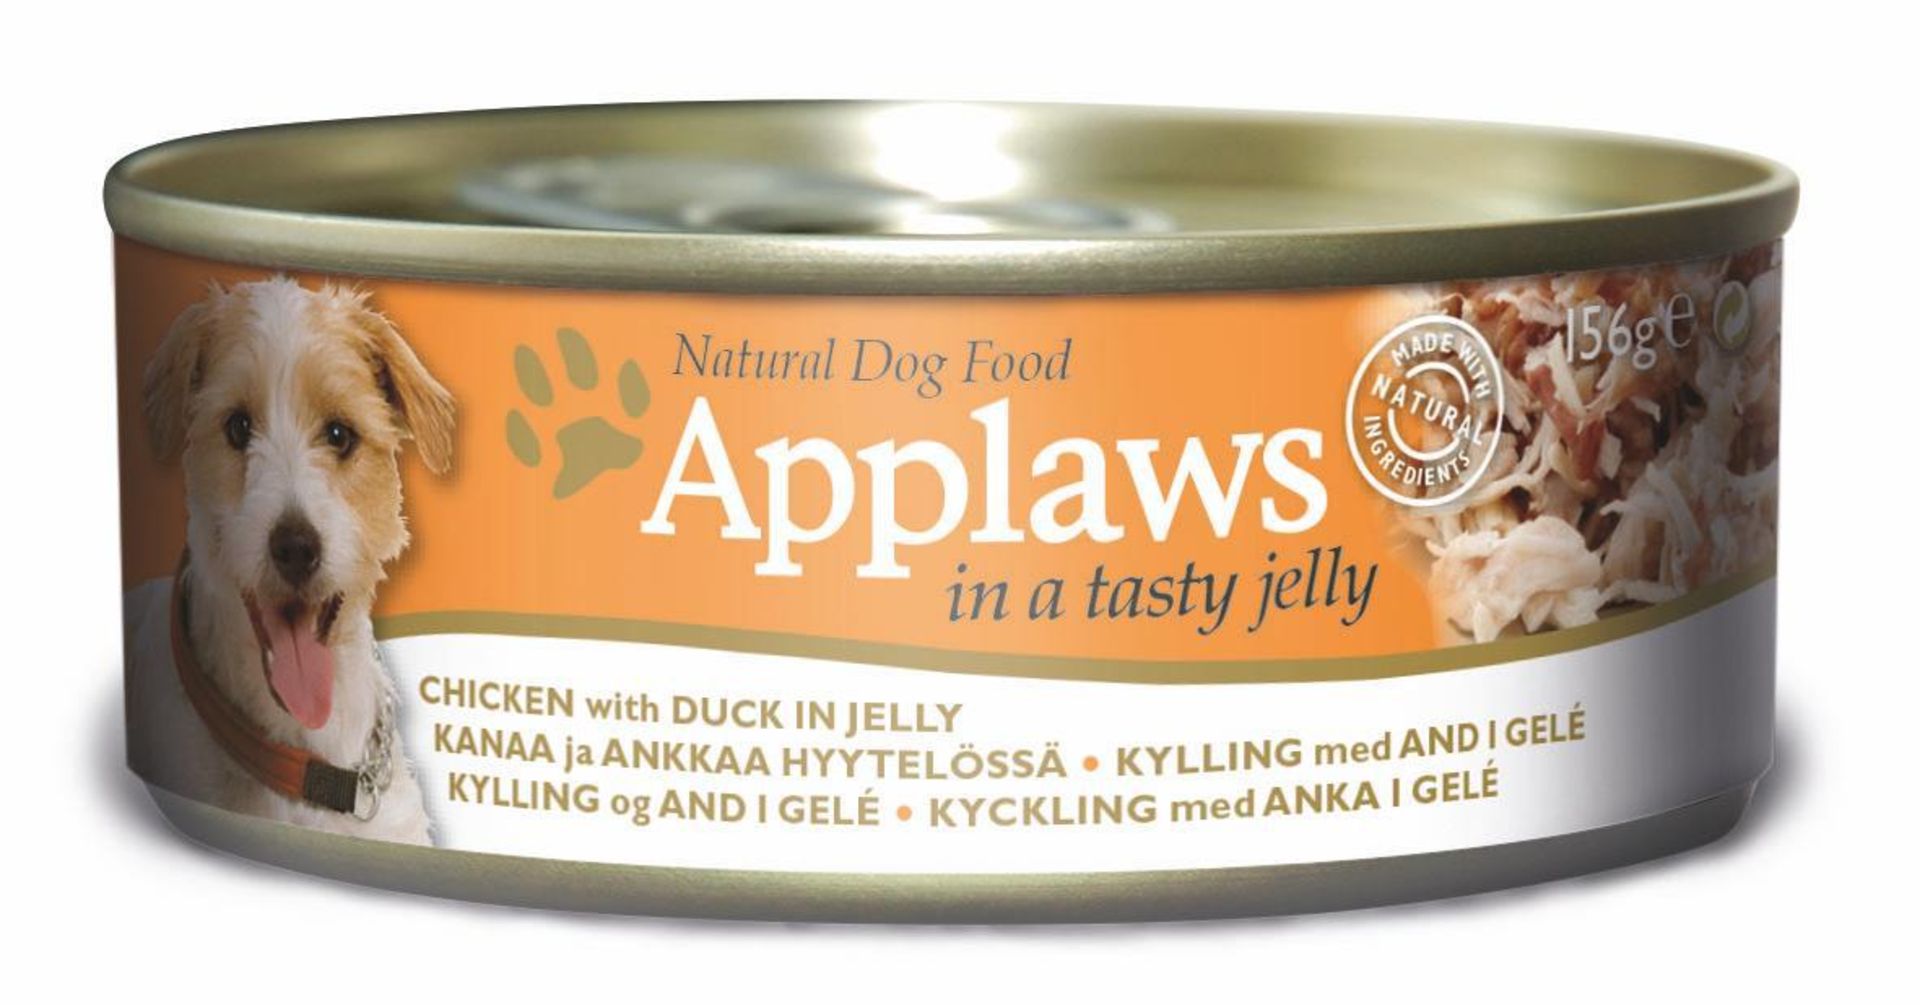 Applaws Dog Tin 12x(6x156g) Chicken with Duck in Jelly. 72 tins total. Full RRP £132 plus.